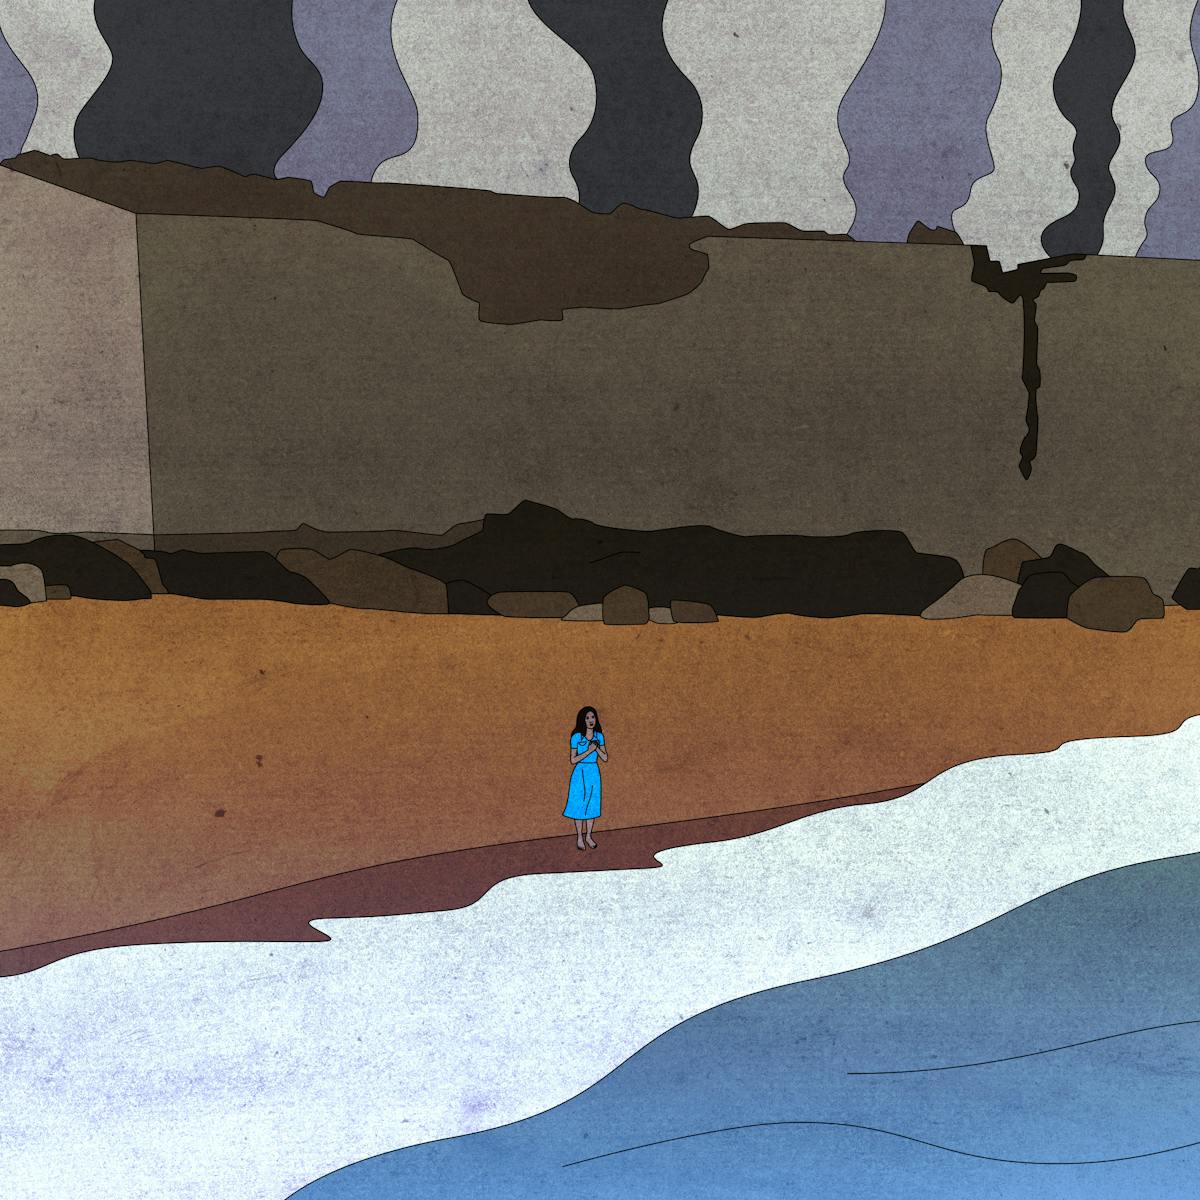 Marie-Laure stands at the edge of the ocean on a beach. Behind her are smoke clouds billowing ominously.